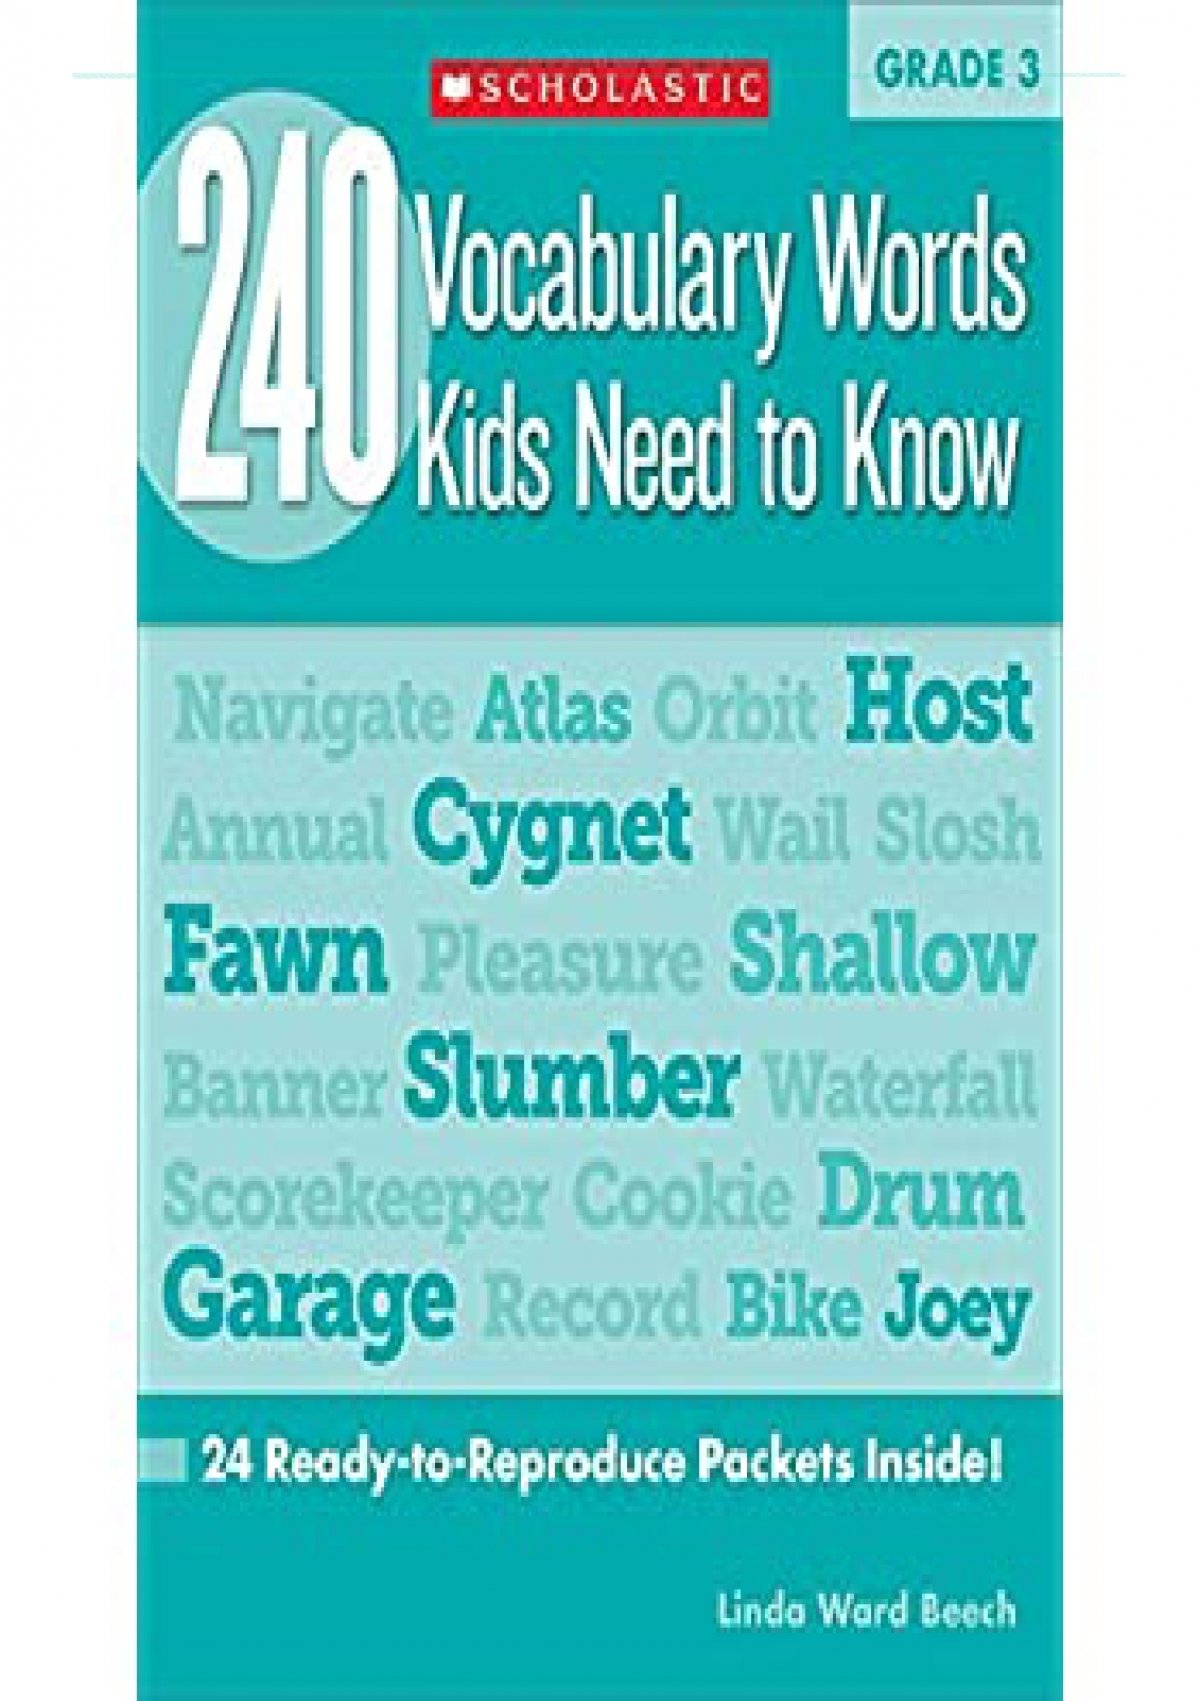 pdf-240-vocabulary-words-kids-need-to-know-grade-3-24-ready-to-reproduce-packets-that-make